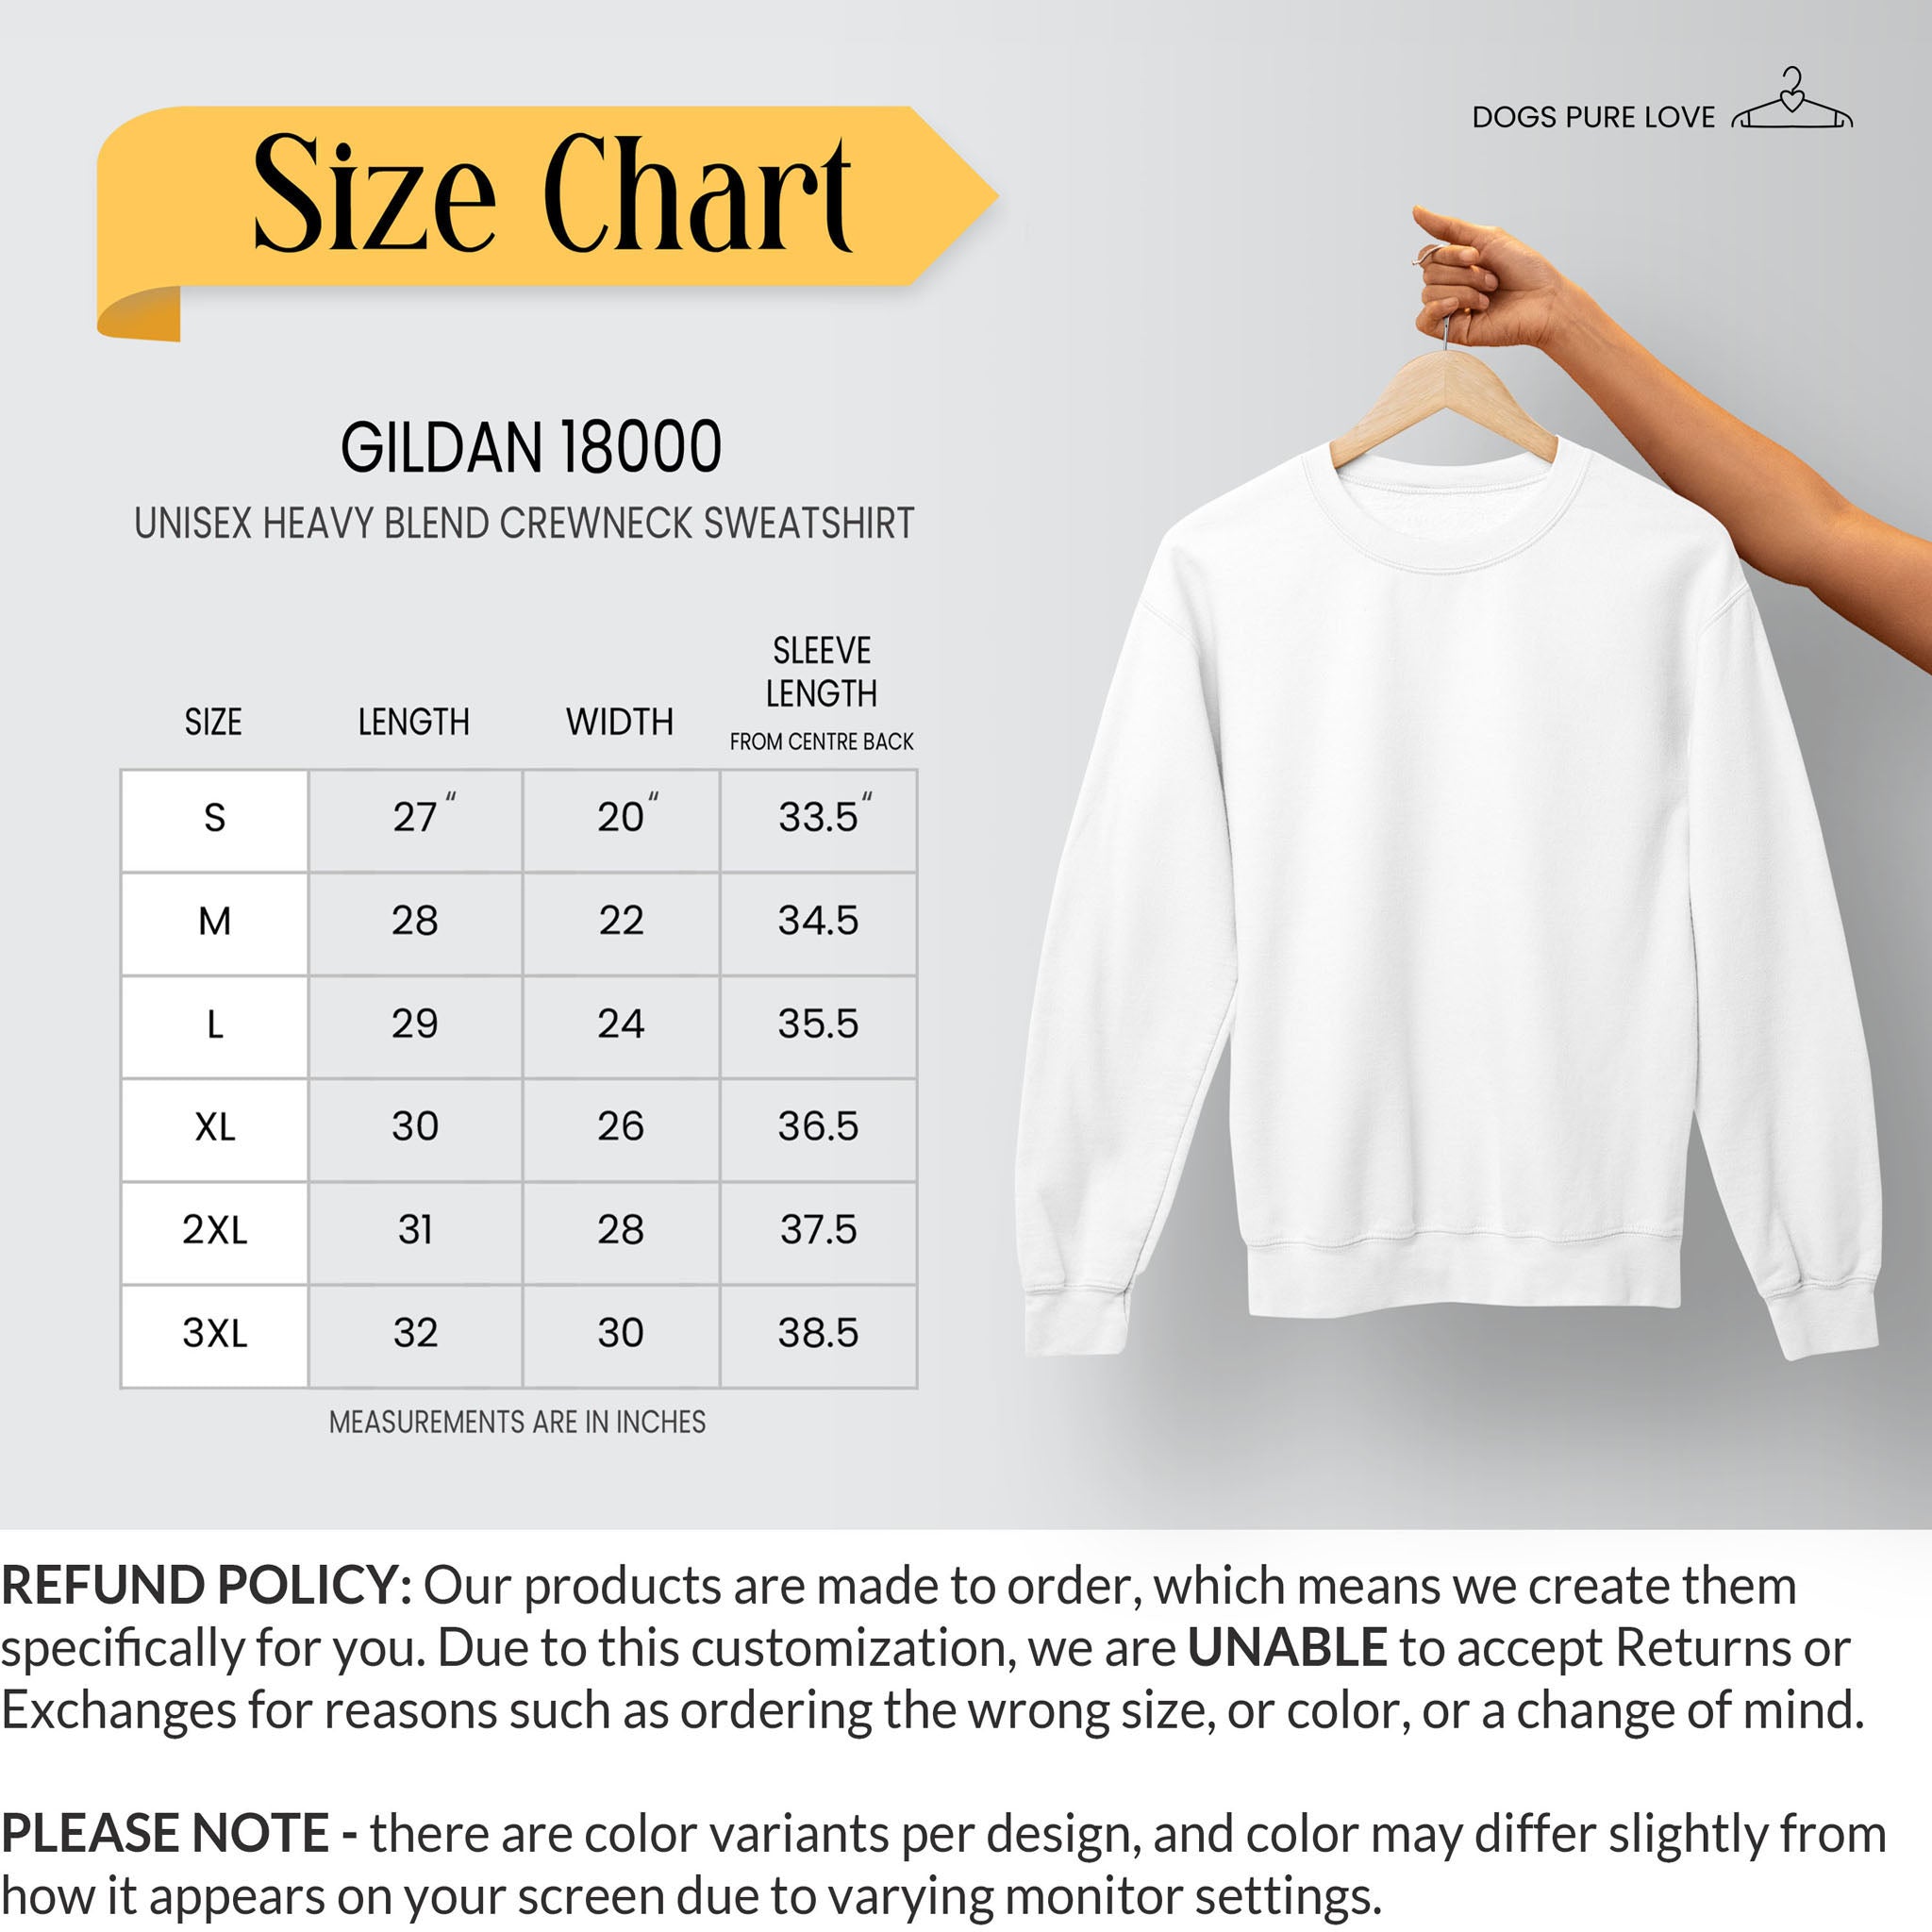 A Size Chart by Dogs Pure Love displays sweatshirt measurements and a short description of the Refund Policy.